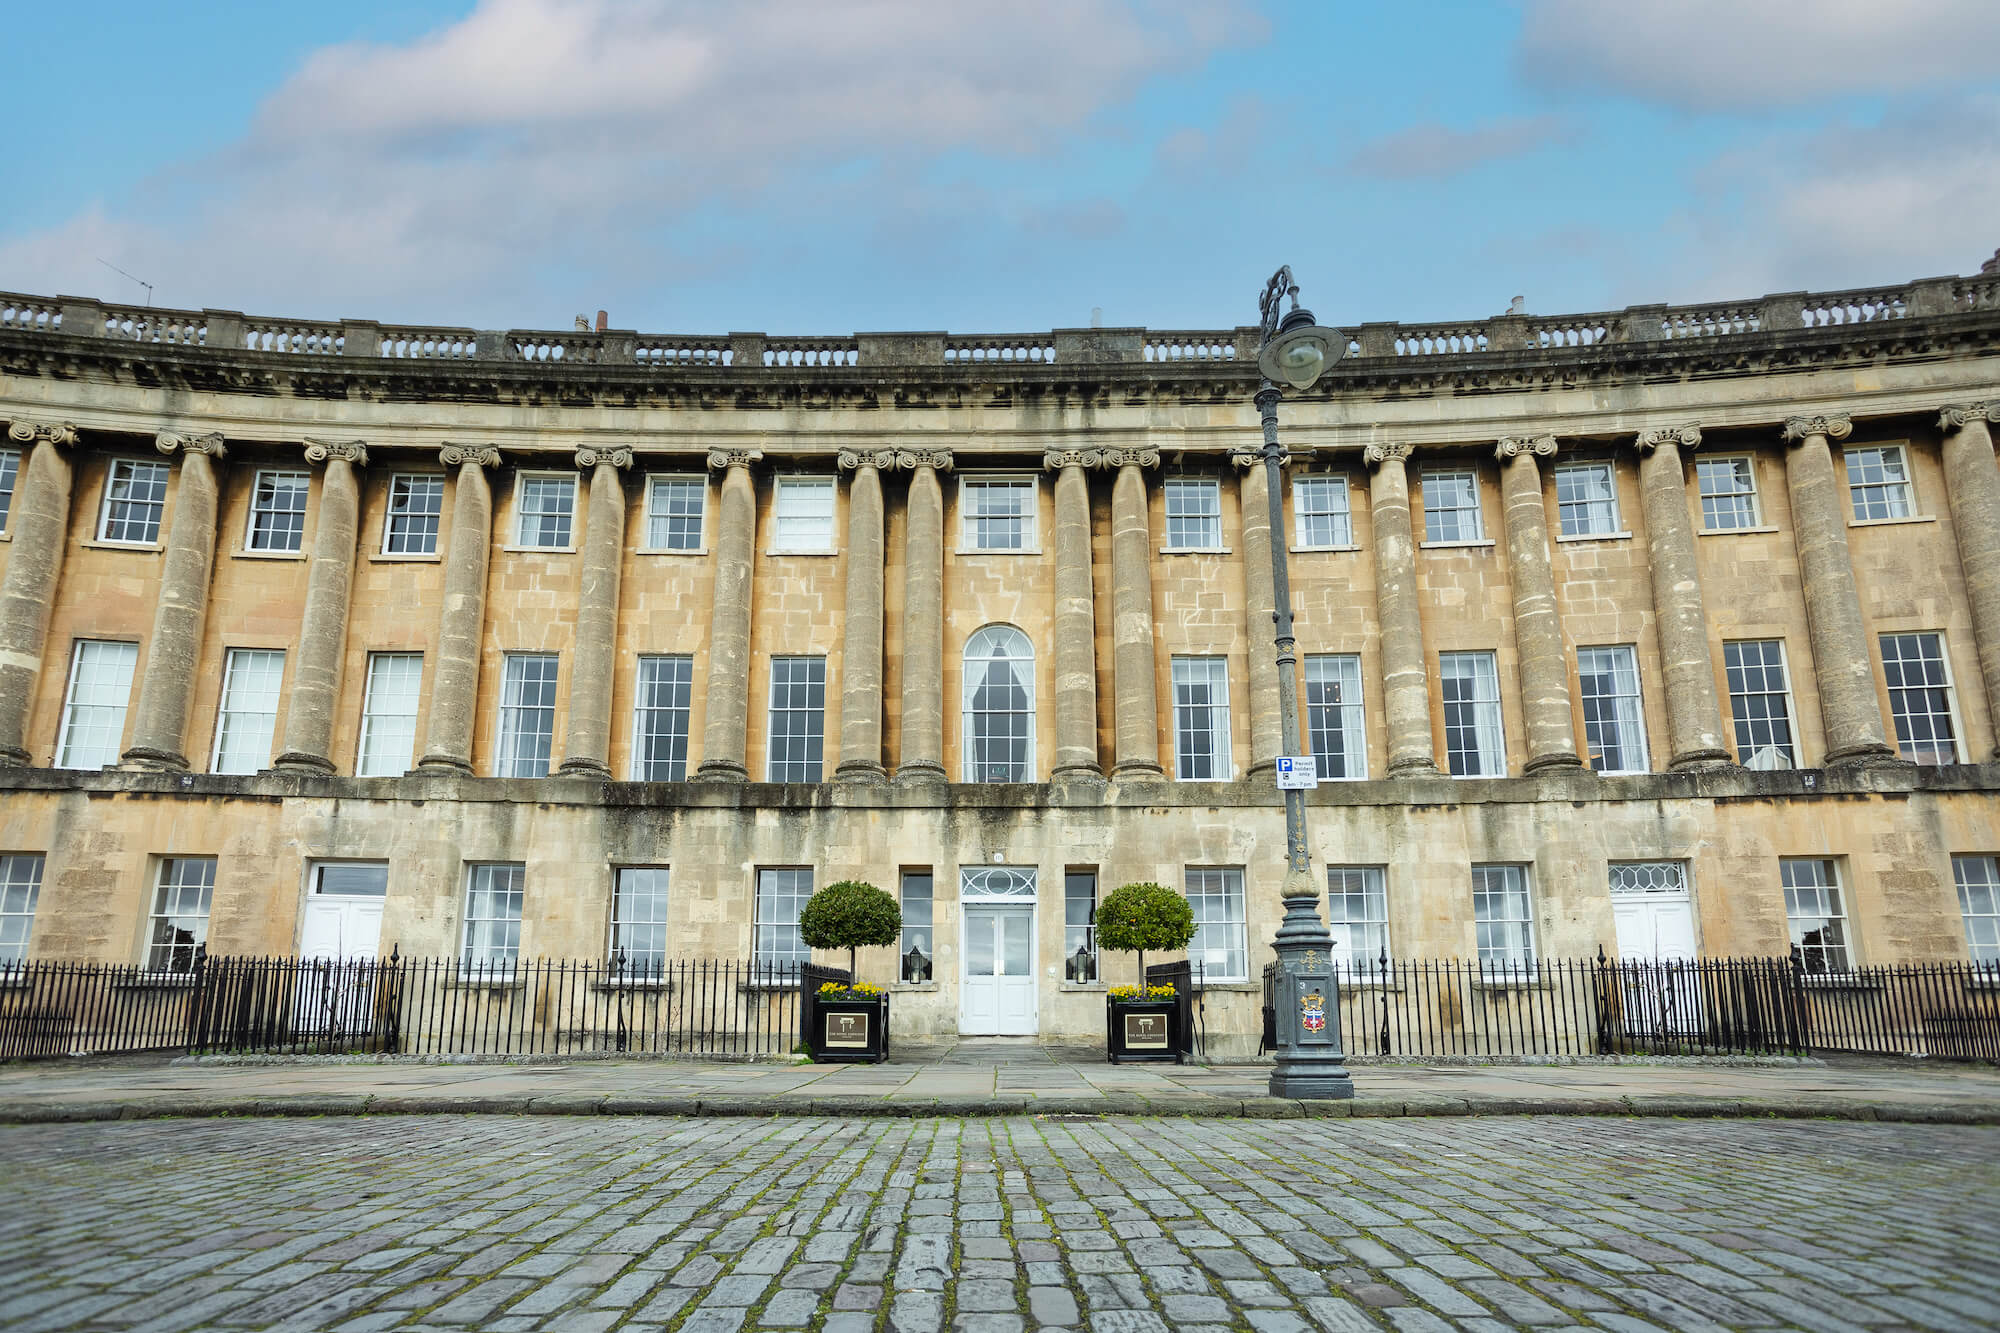 Image of Royal Crescent Hotel in Bath